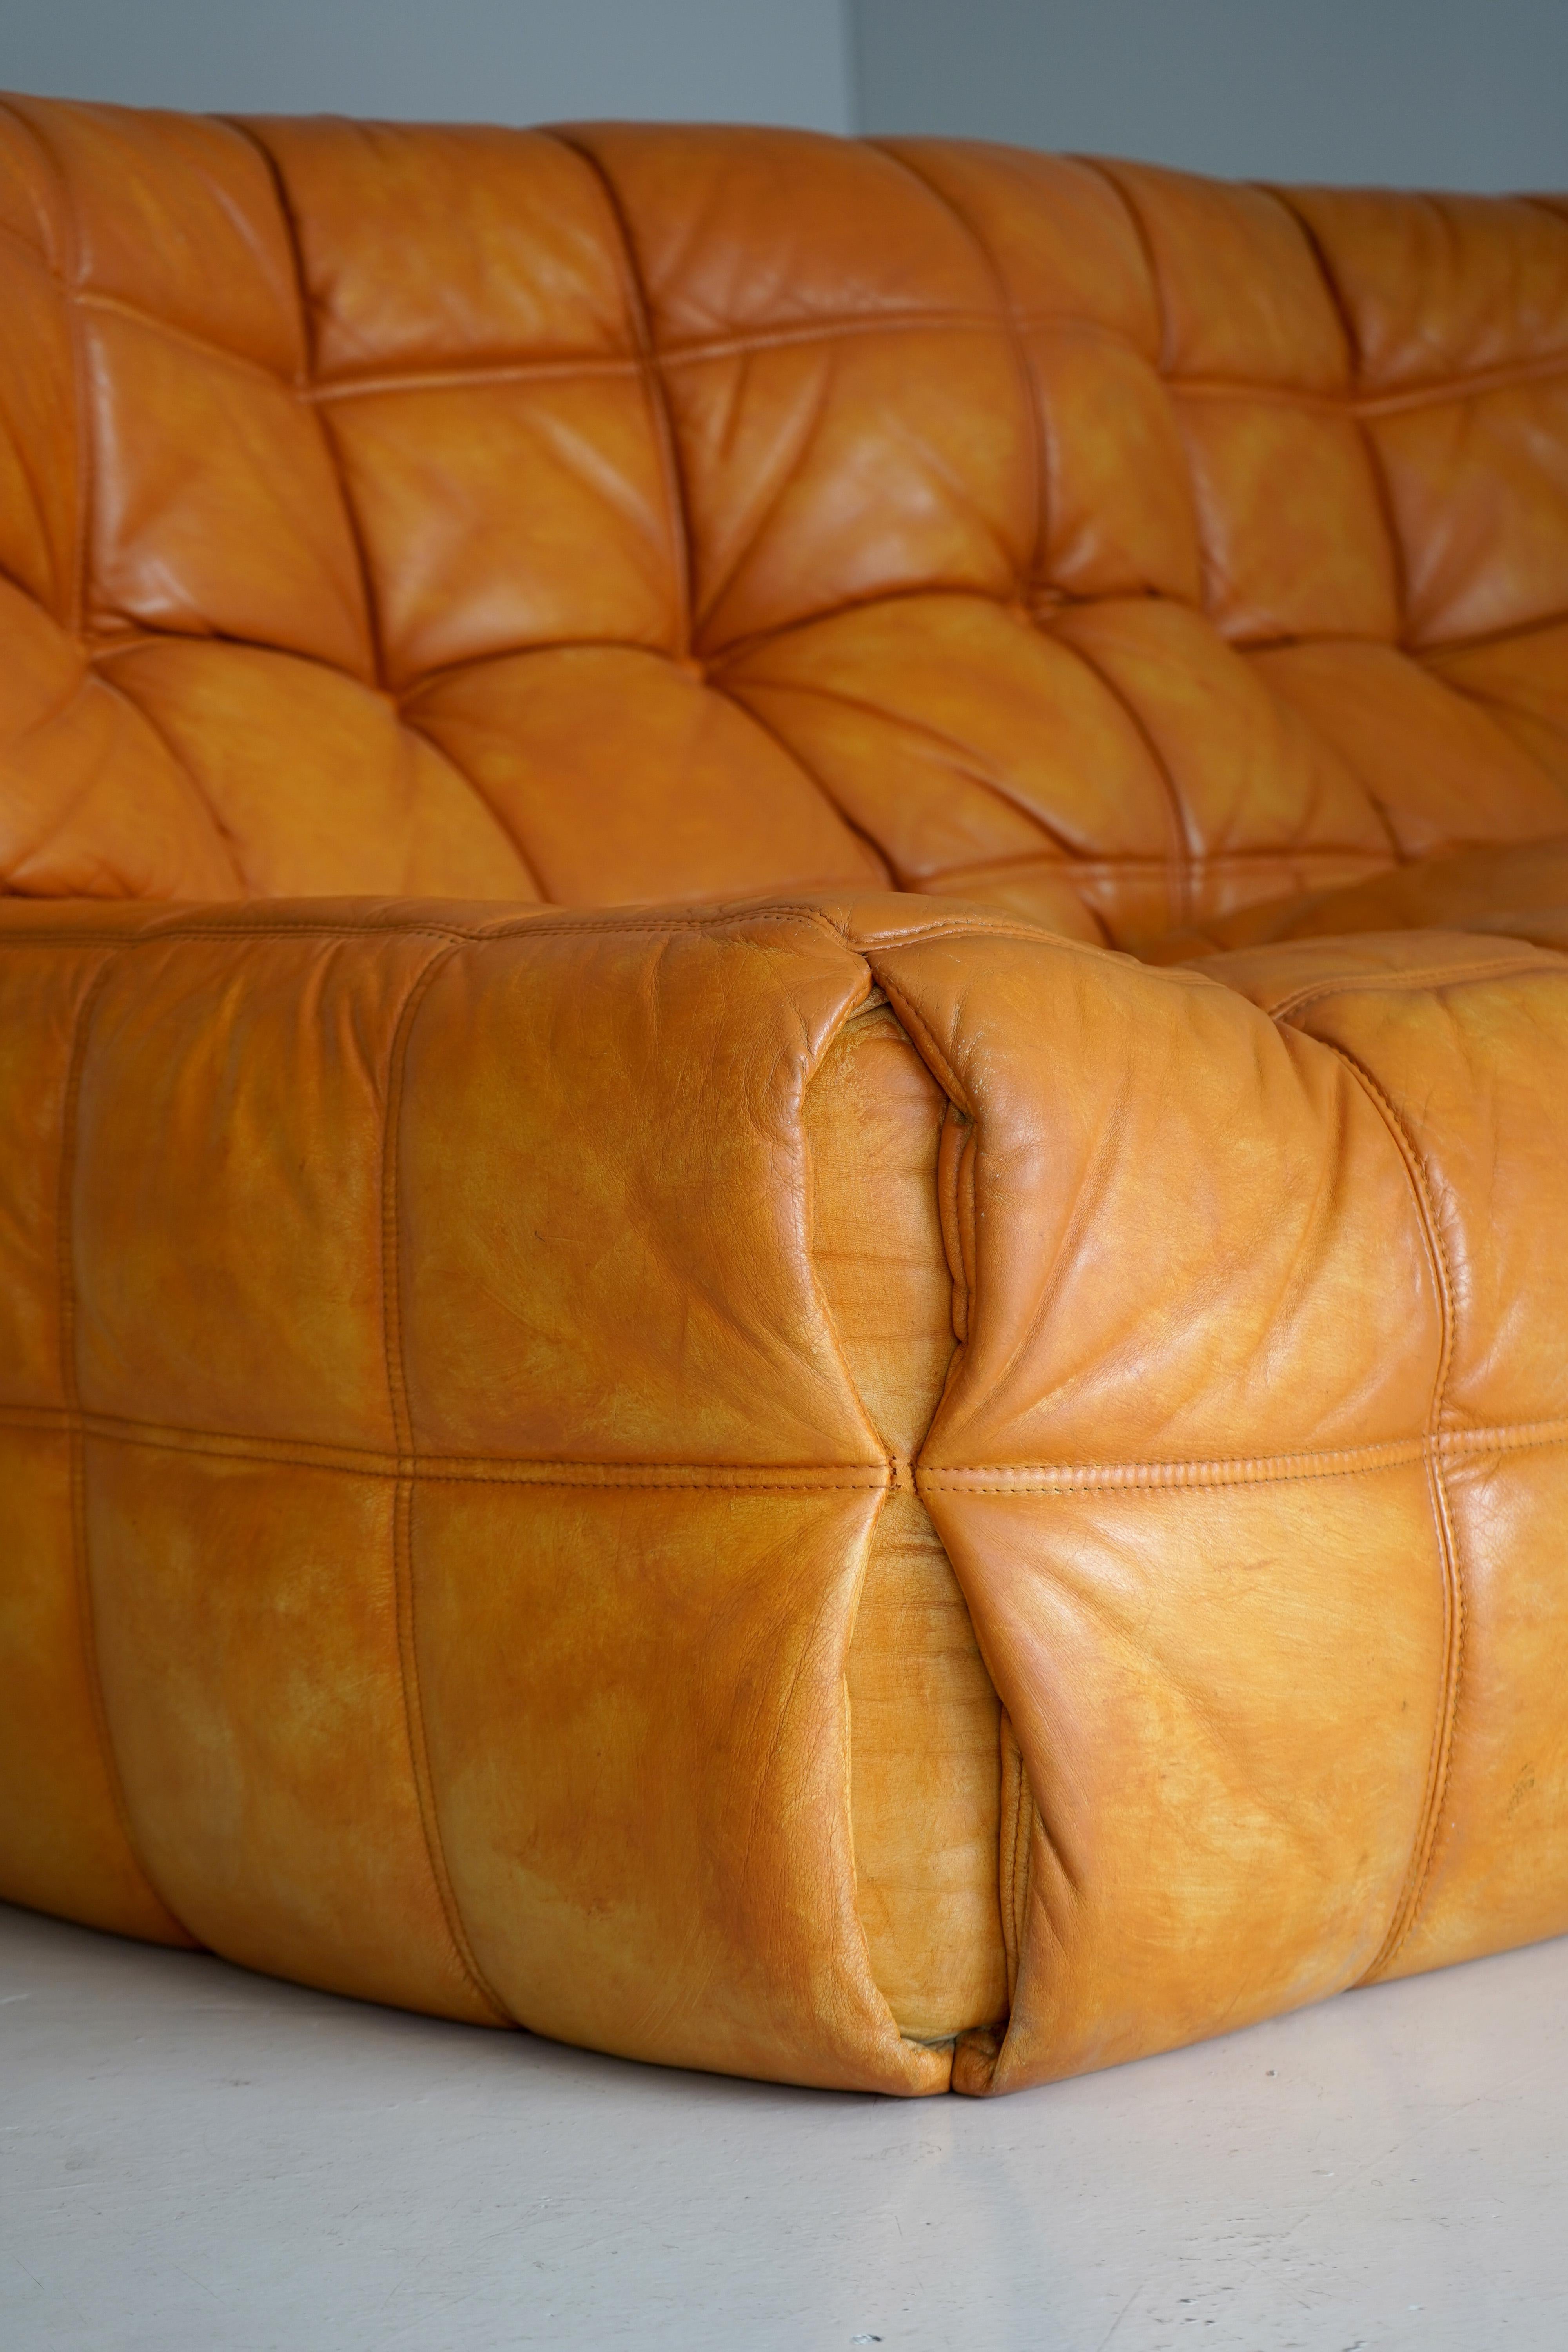 Designed in 1976 by iconic French designer Michel Ducaroy to mimic fluffy clouds. One of multiple all-foam designs by Ducaroy for Ligne Roset along with the Gilda, Adria, Safi, Yoko, Gilda, and the iconic Togo. All with no internal frame and instead